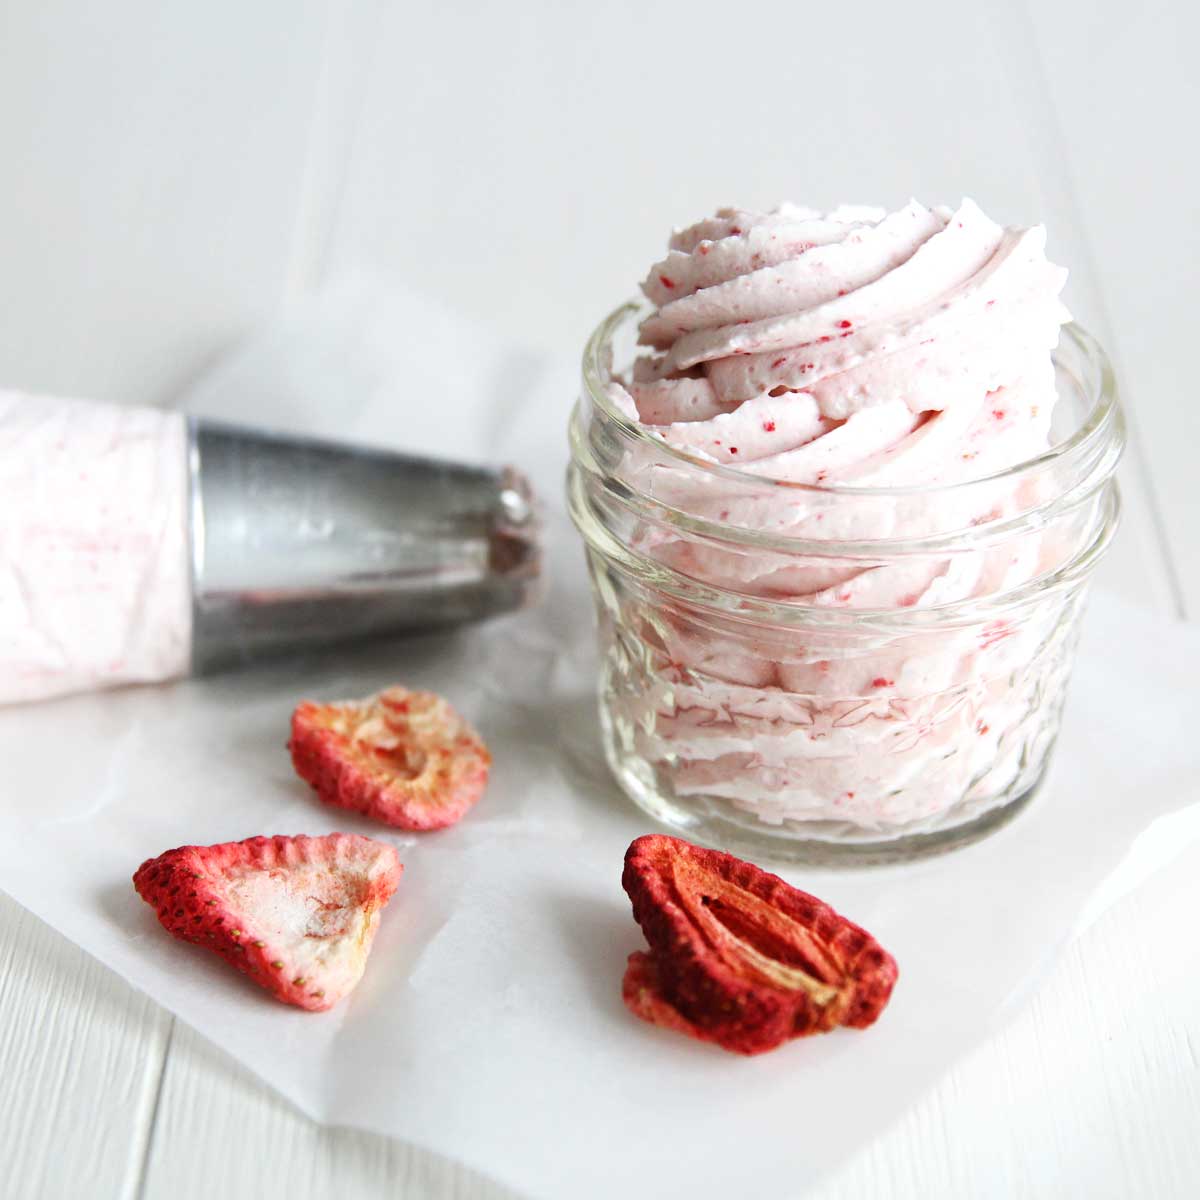 Creamy & Thick Strawberry Cheesecake Whipped Cream (Low-Carb, Keto Recipe) - Whipped Cream Recipes